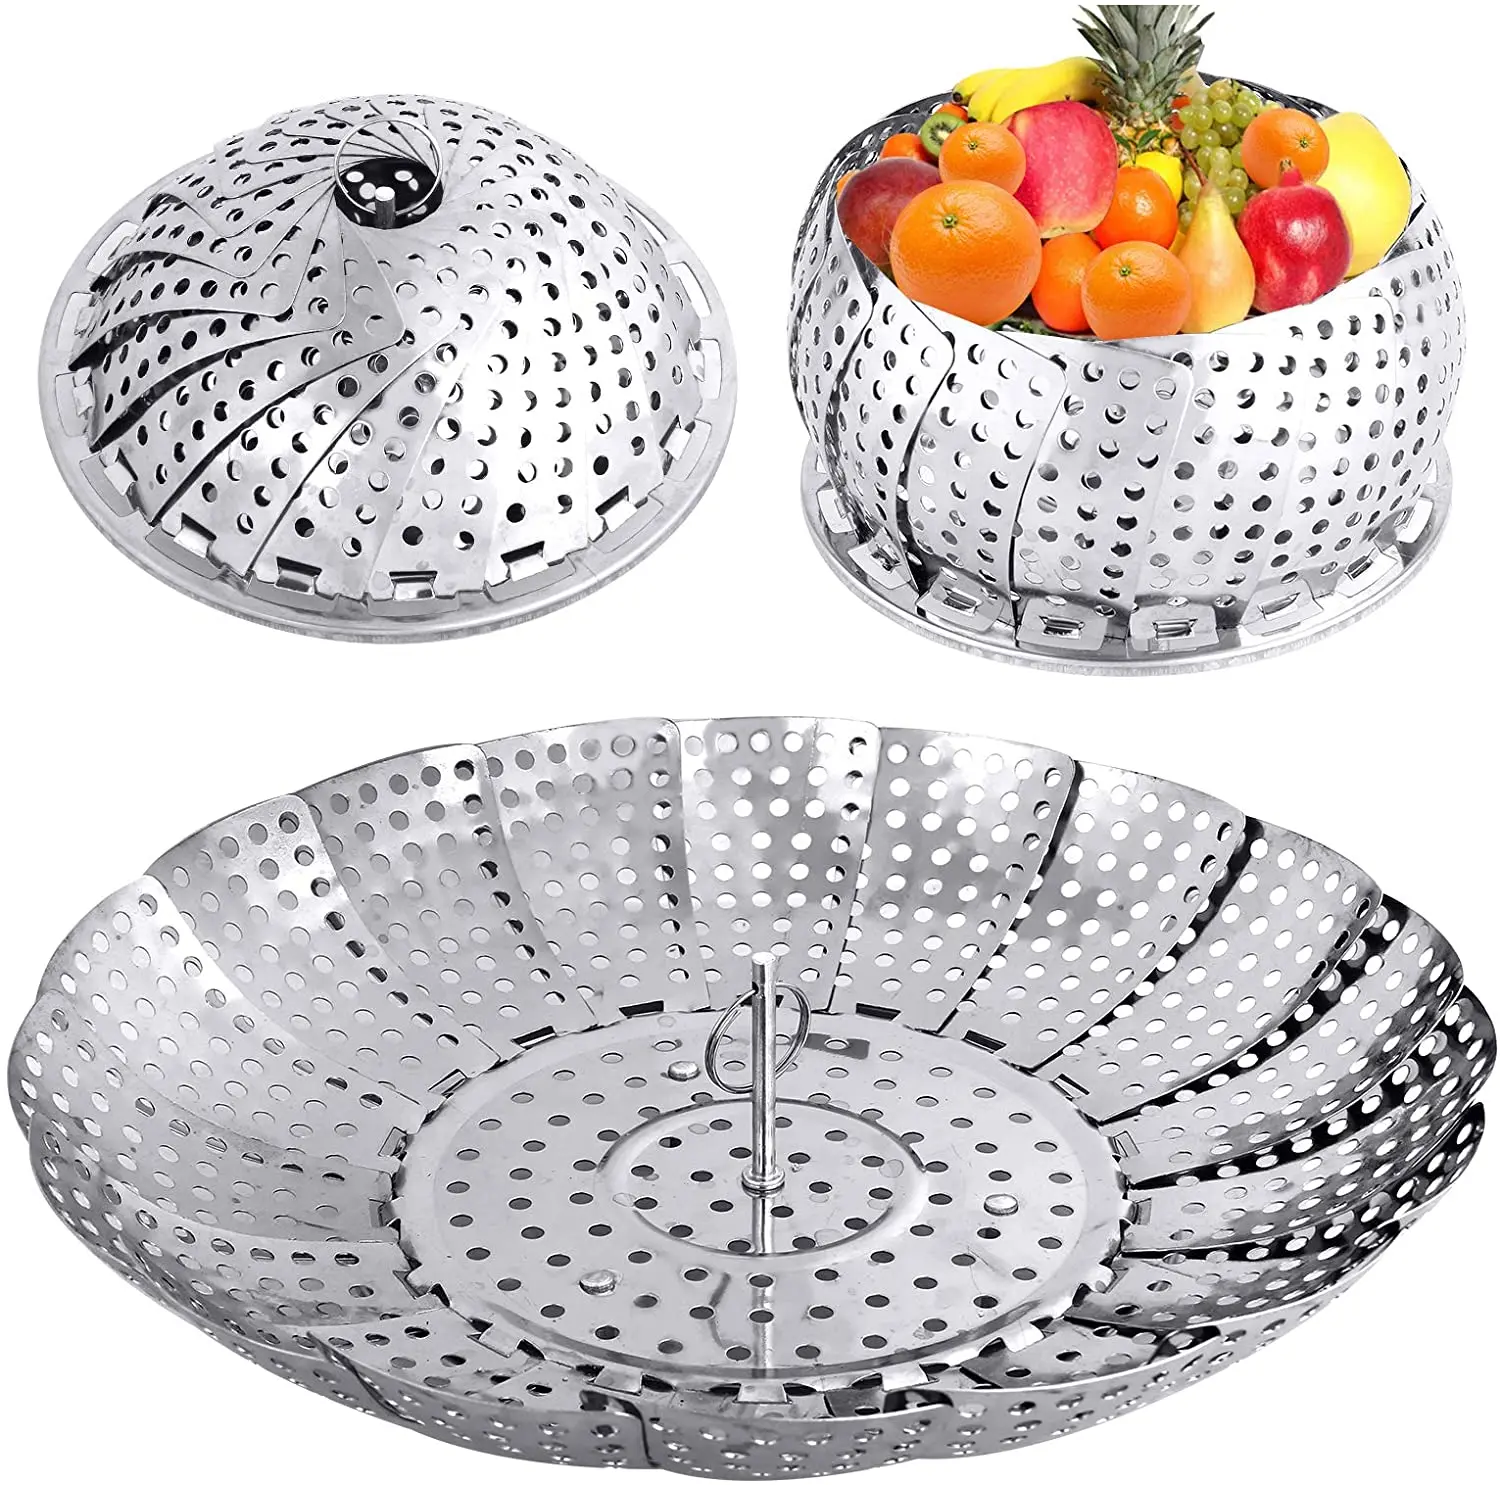 Aiasiry Vegetable Steamer Basket Stainless Steel Steamer Basket Folding Expandable Steamers Silver Color,Size 1 